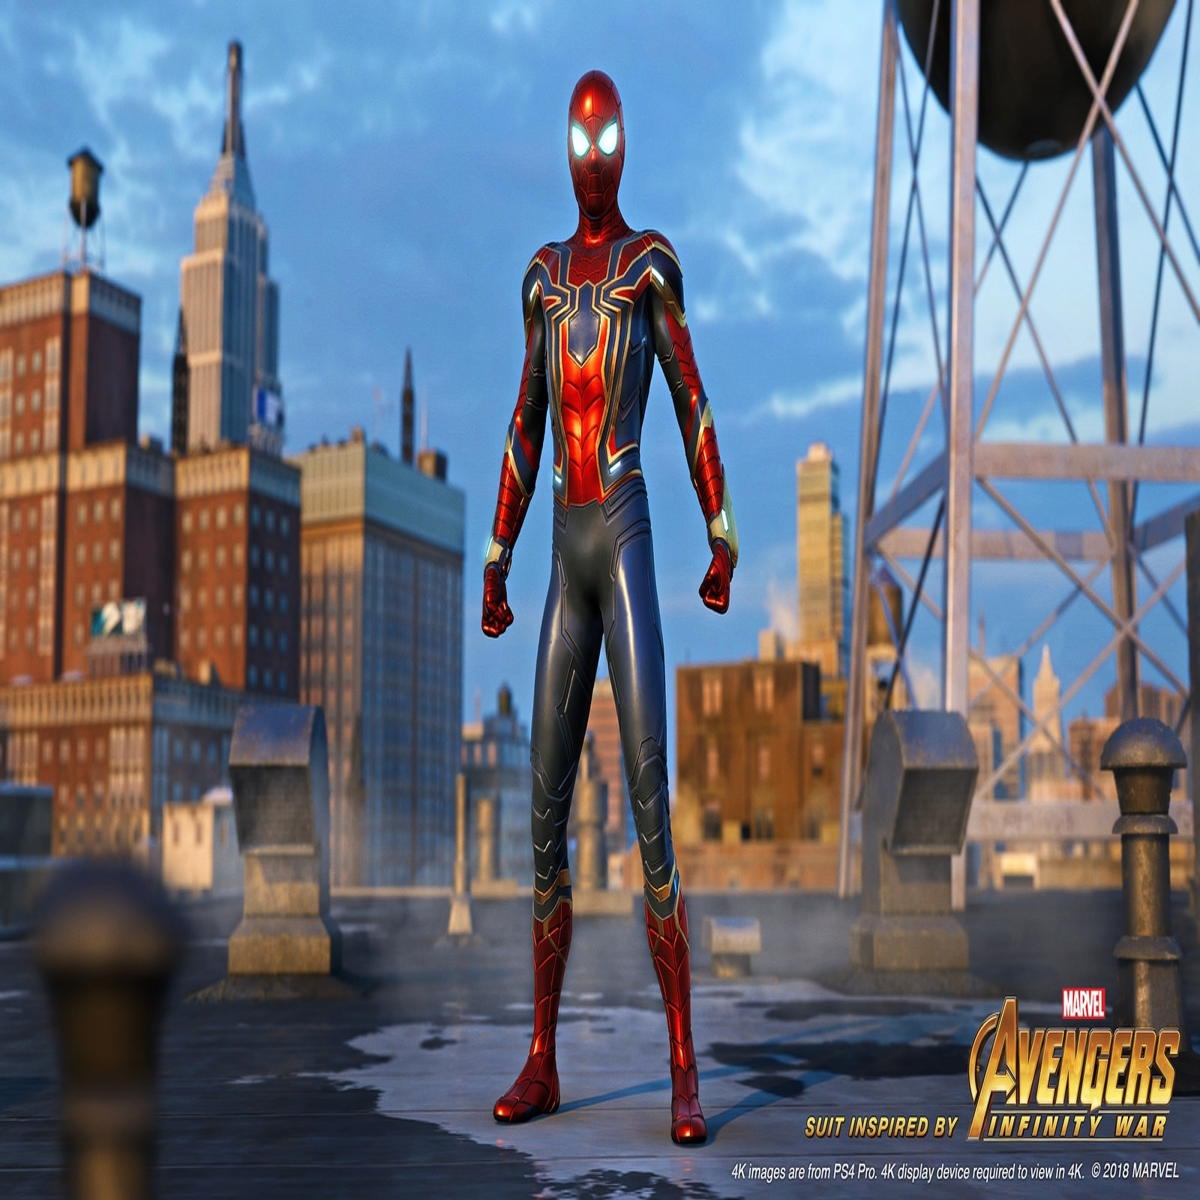 Top 999+ iron spider images – Amazing Collection iron spider images Full 4K